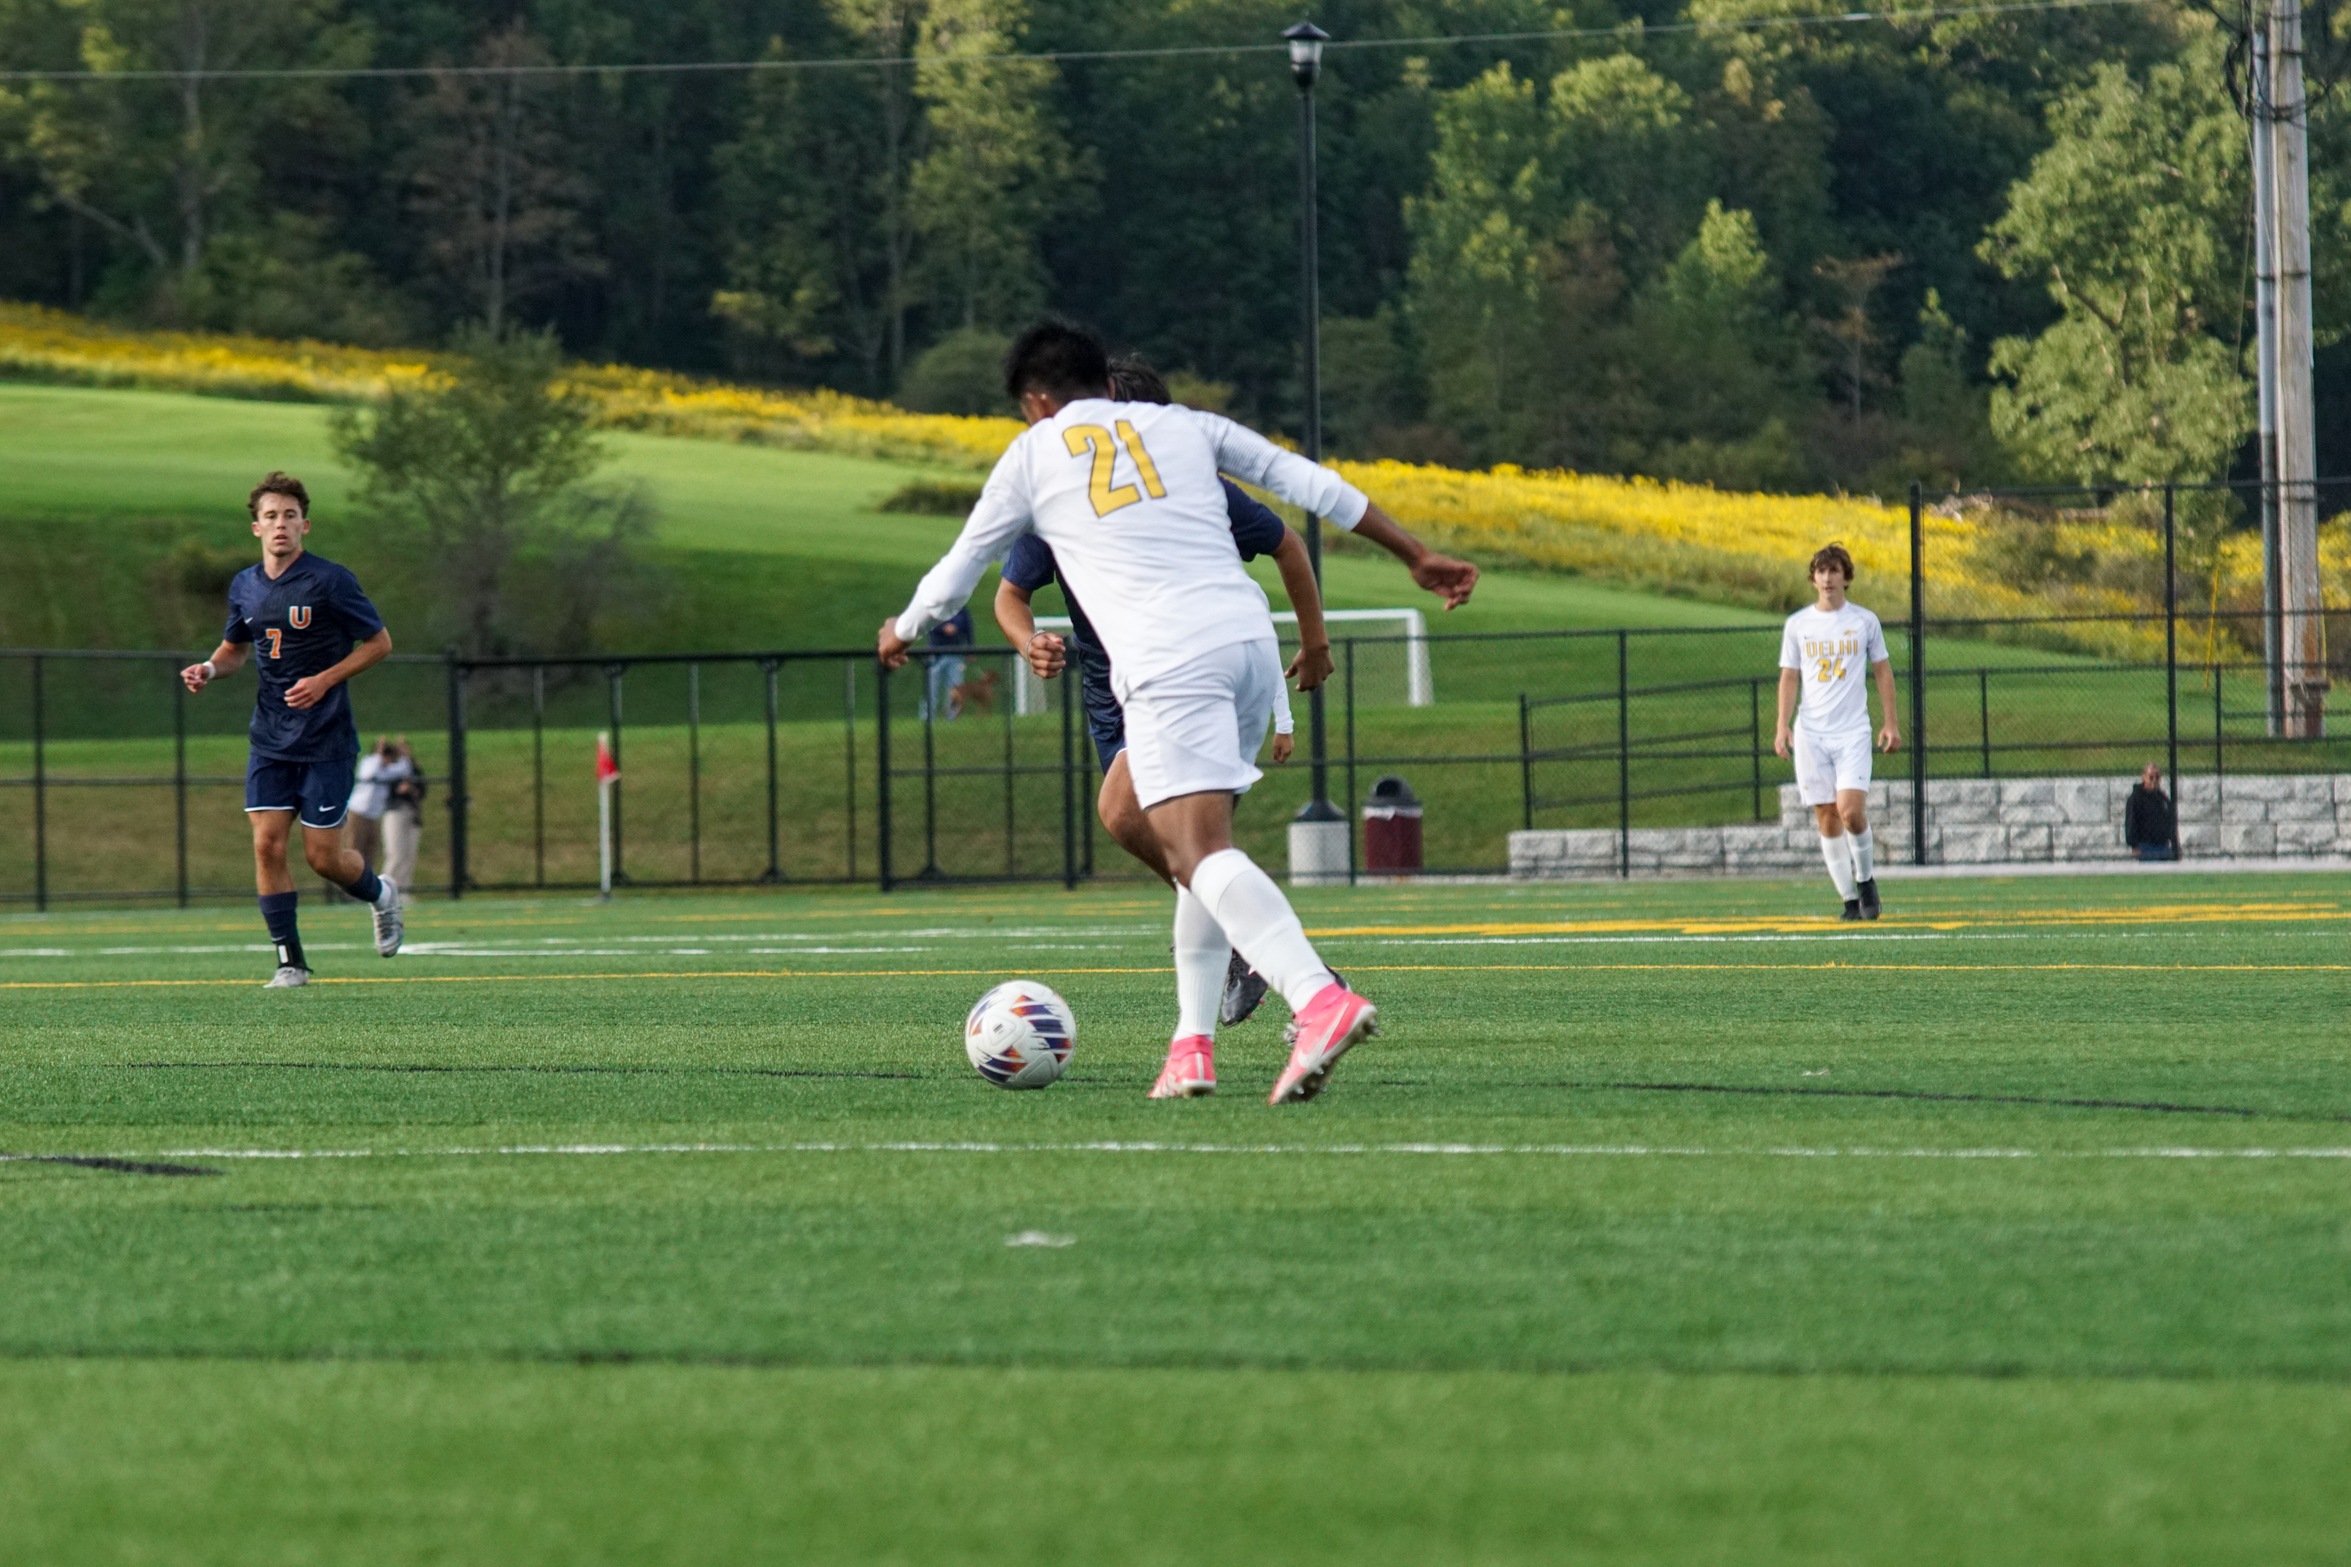 Men's Soccer battle with Utica ends in draw at Neil Riddell Field